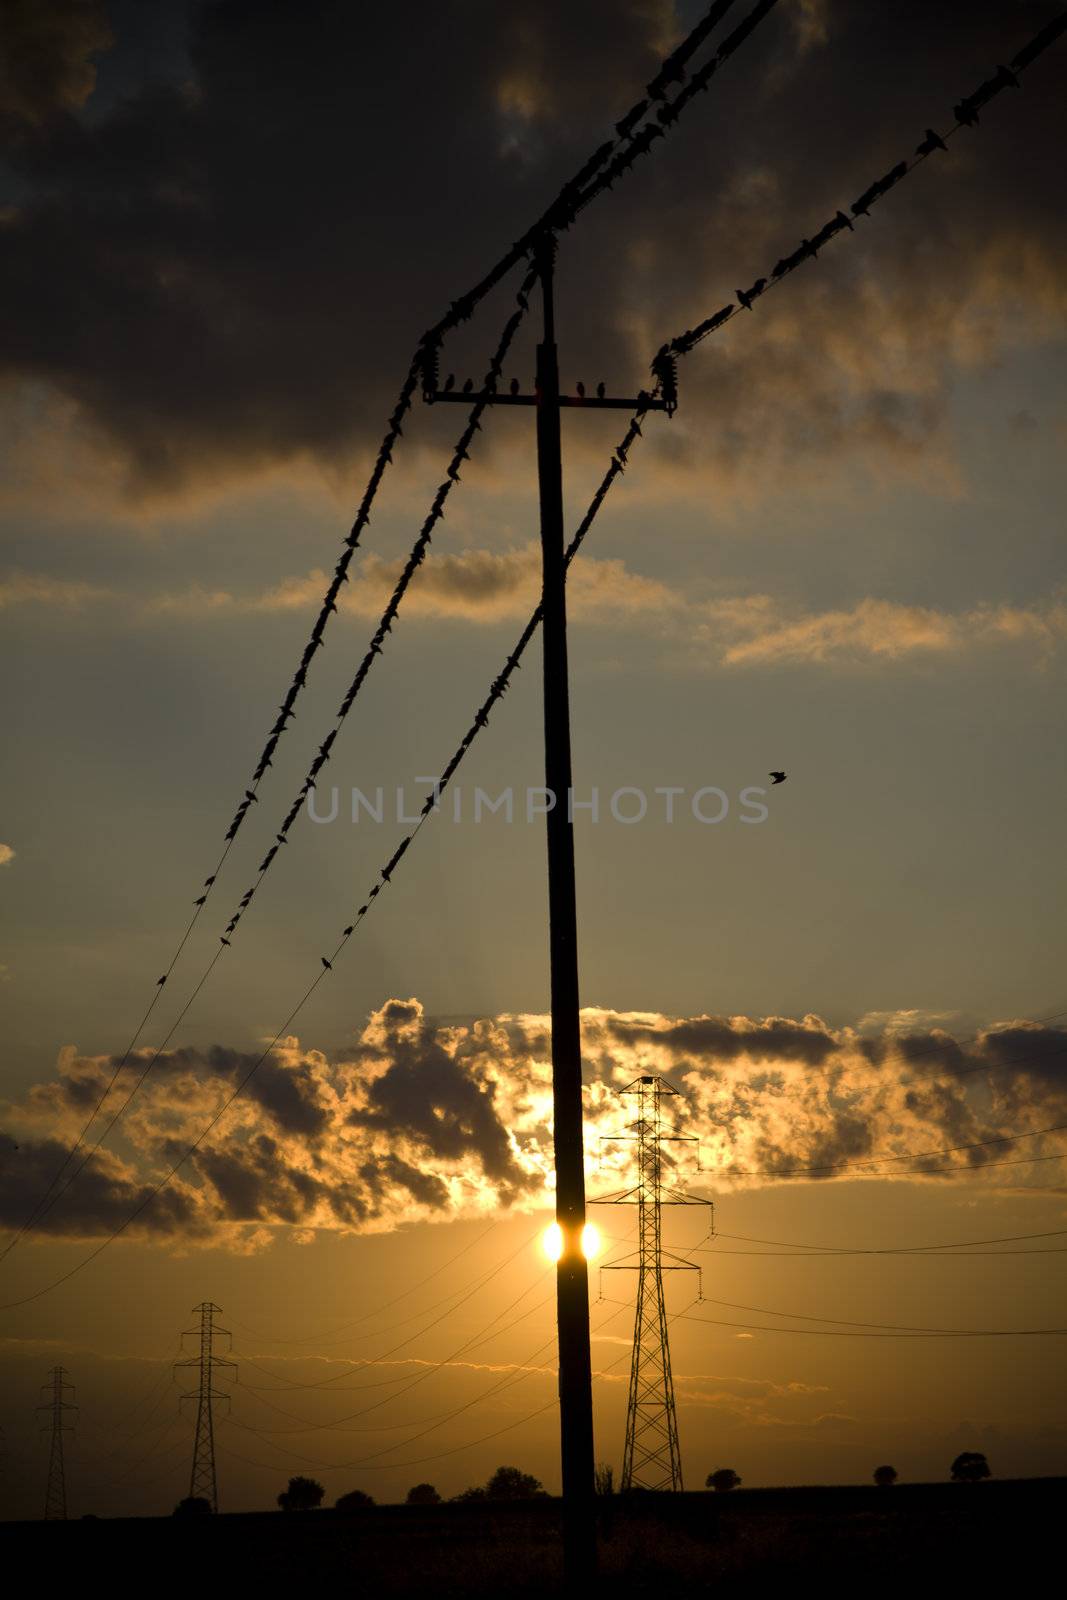 some small birds sitting on high tension wires